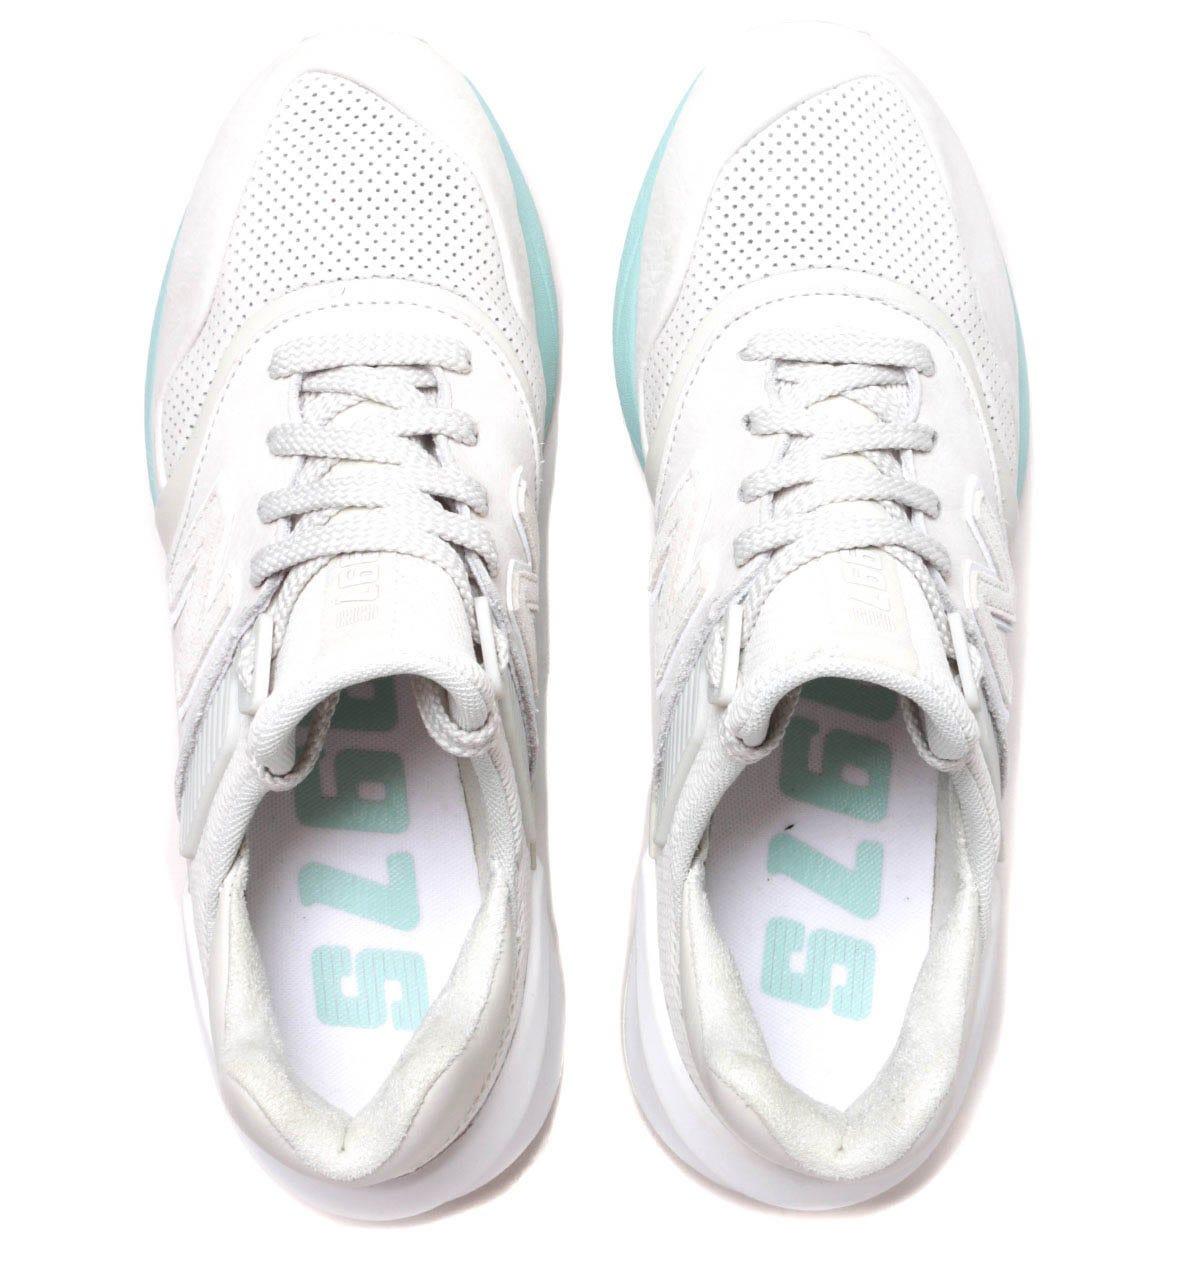 New Balance 997 Off White & Mint Green Suede & Mesh Trainers for Men | Lyst